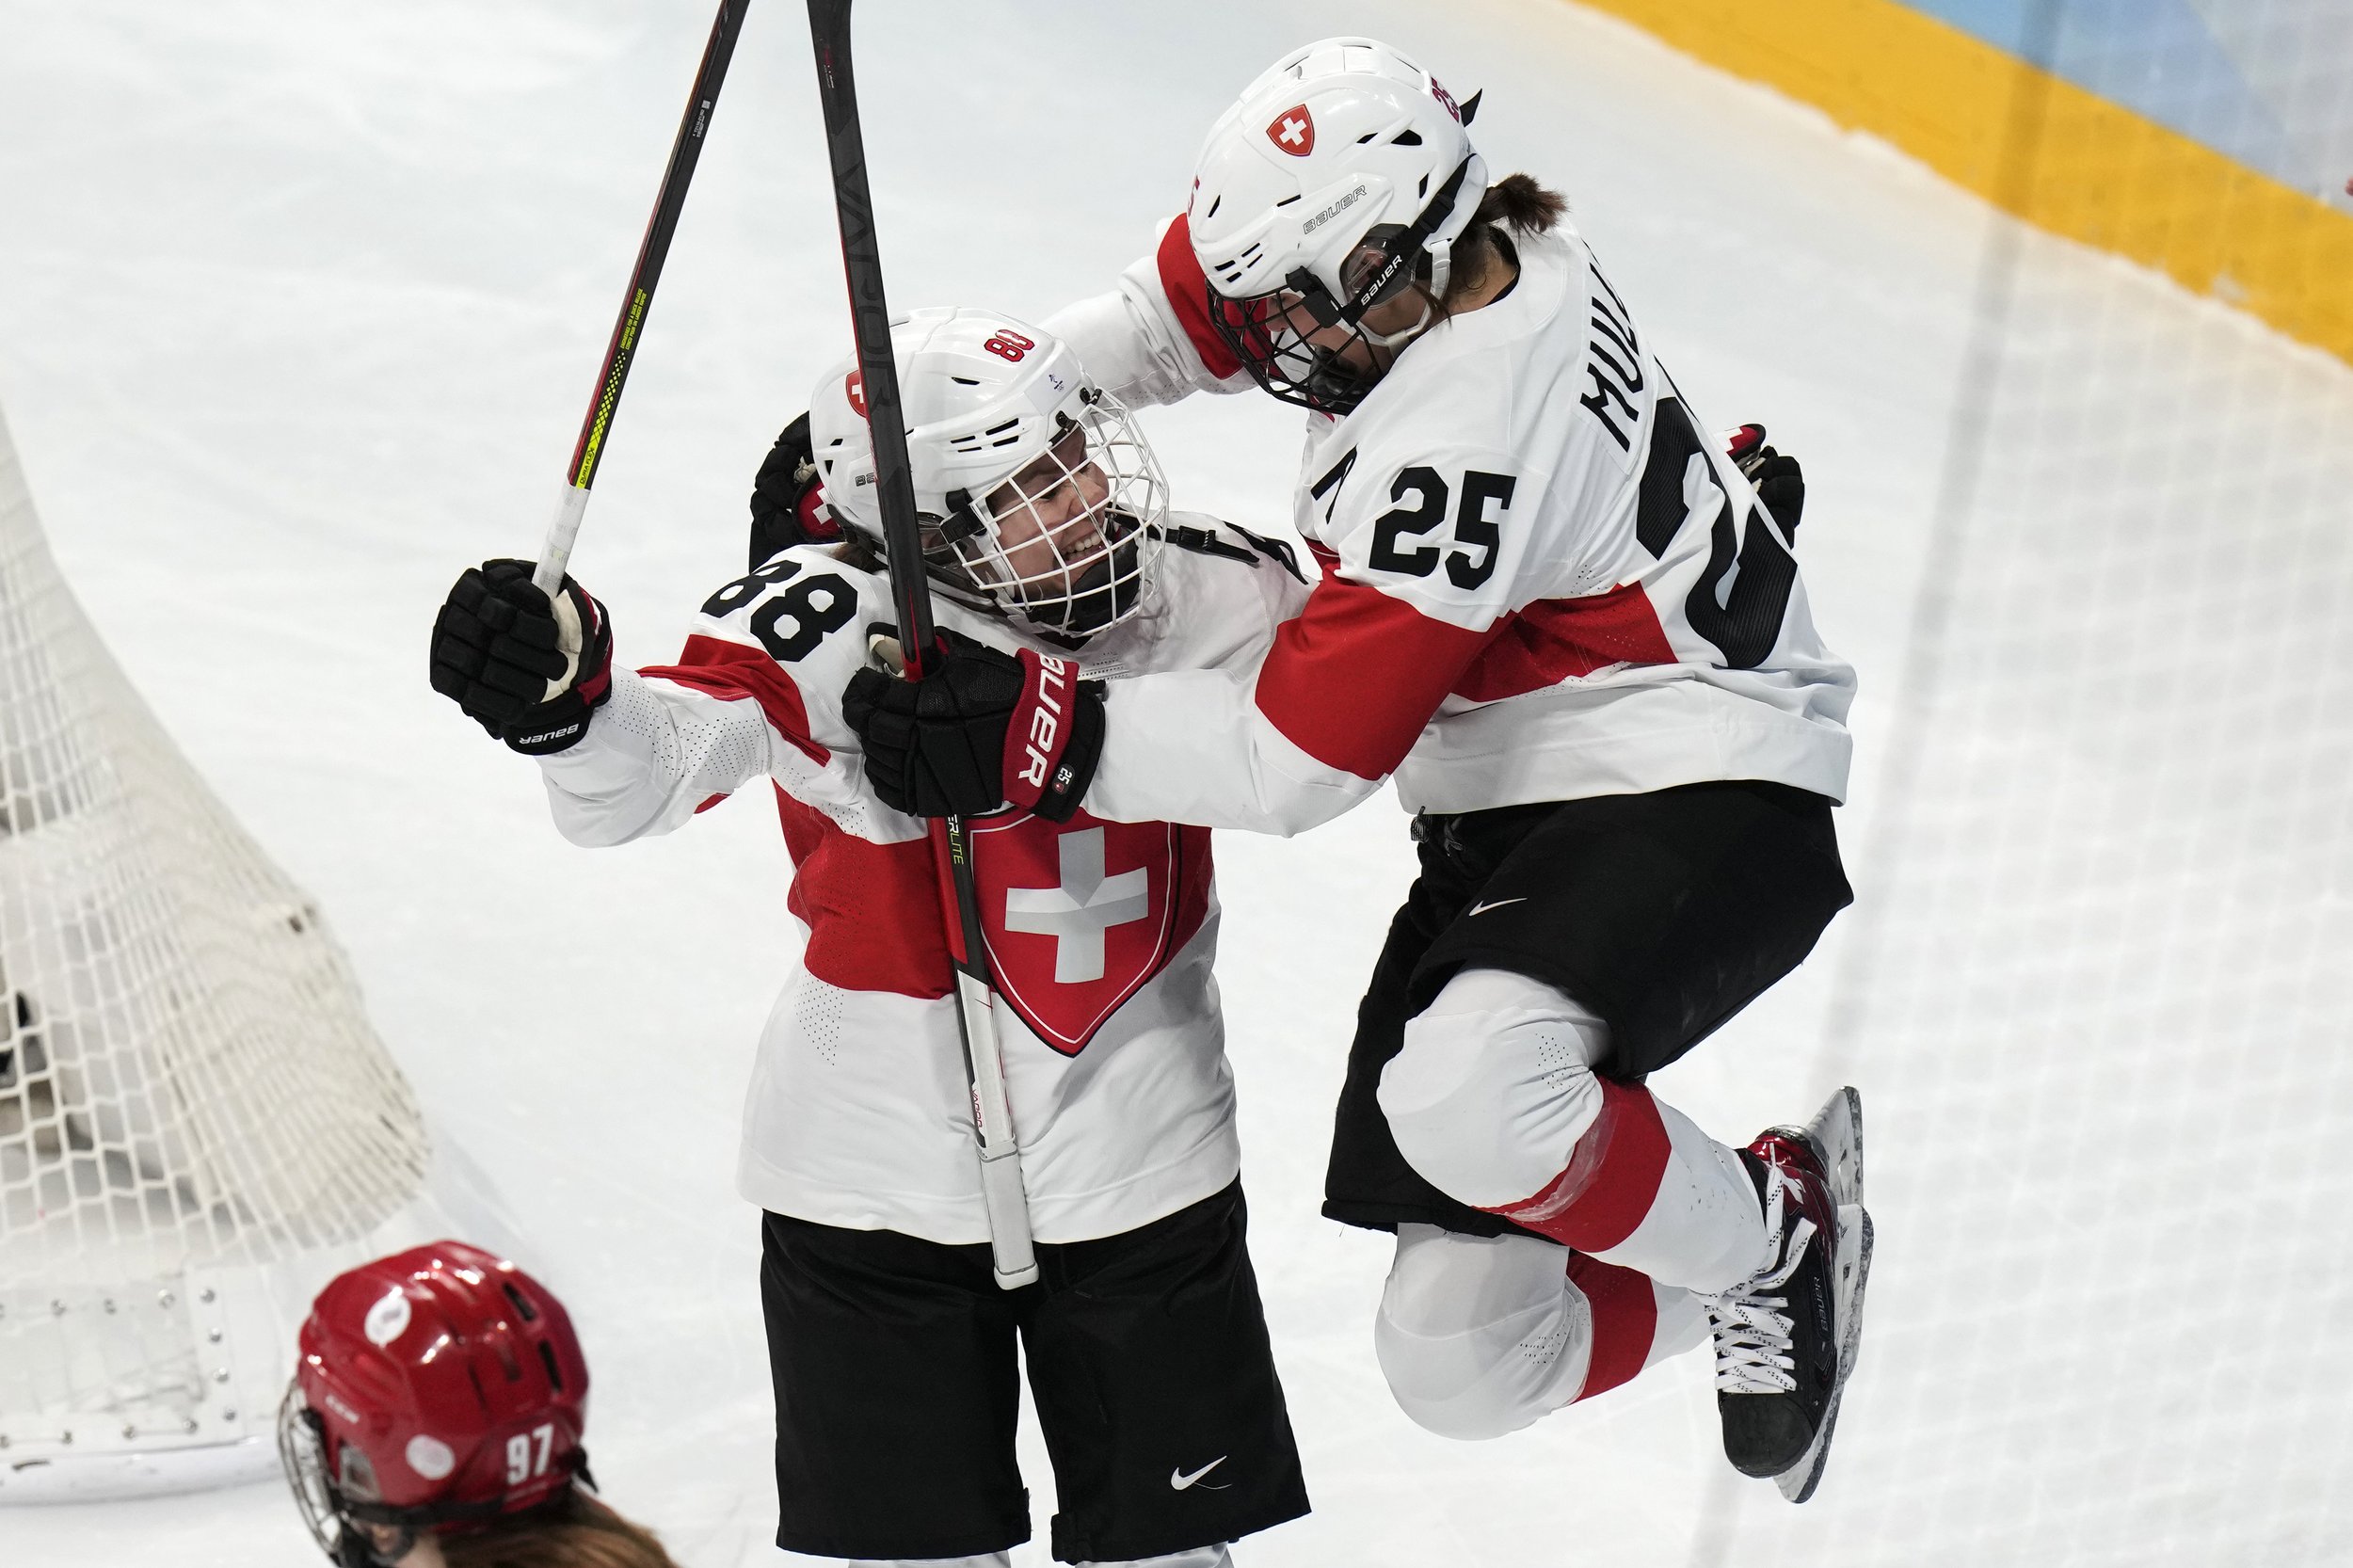  Switzerland's Phoebe Staenz (88) celebrates her goal with teammate Alina Muller (25) against the Russian Olympic Committee during a women's quarterfinal hockey game at the 2022 Winter Olympics, Saturday, Feb. 12, 2022, in Beijing. (AP Photo/Petr Dav